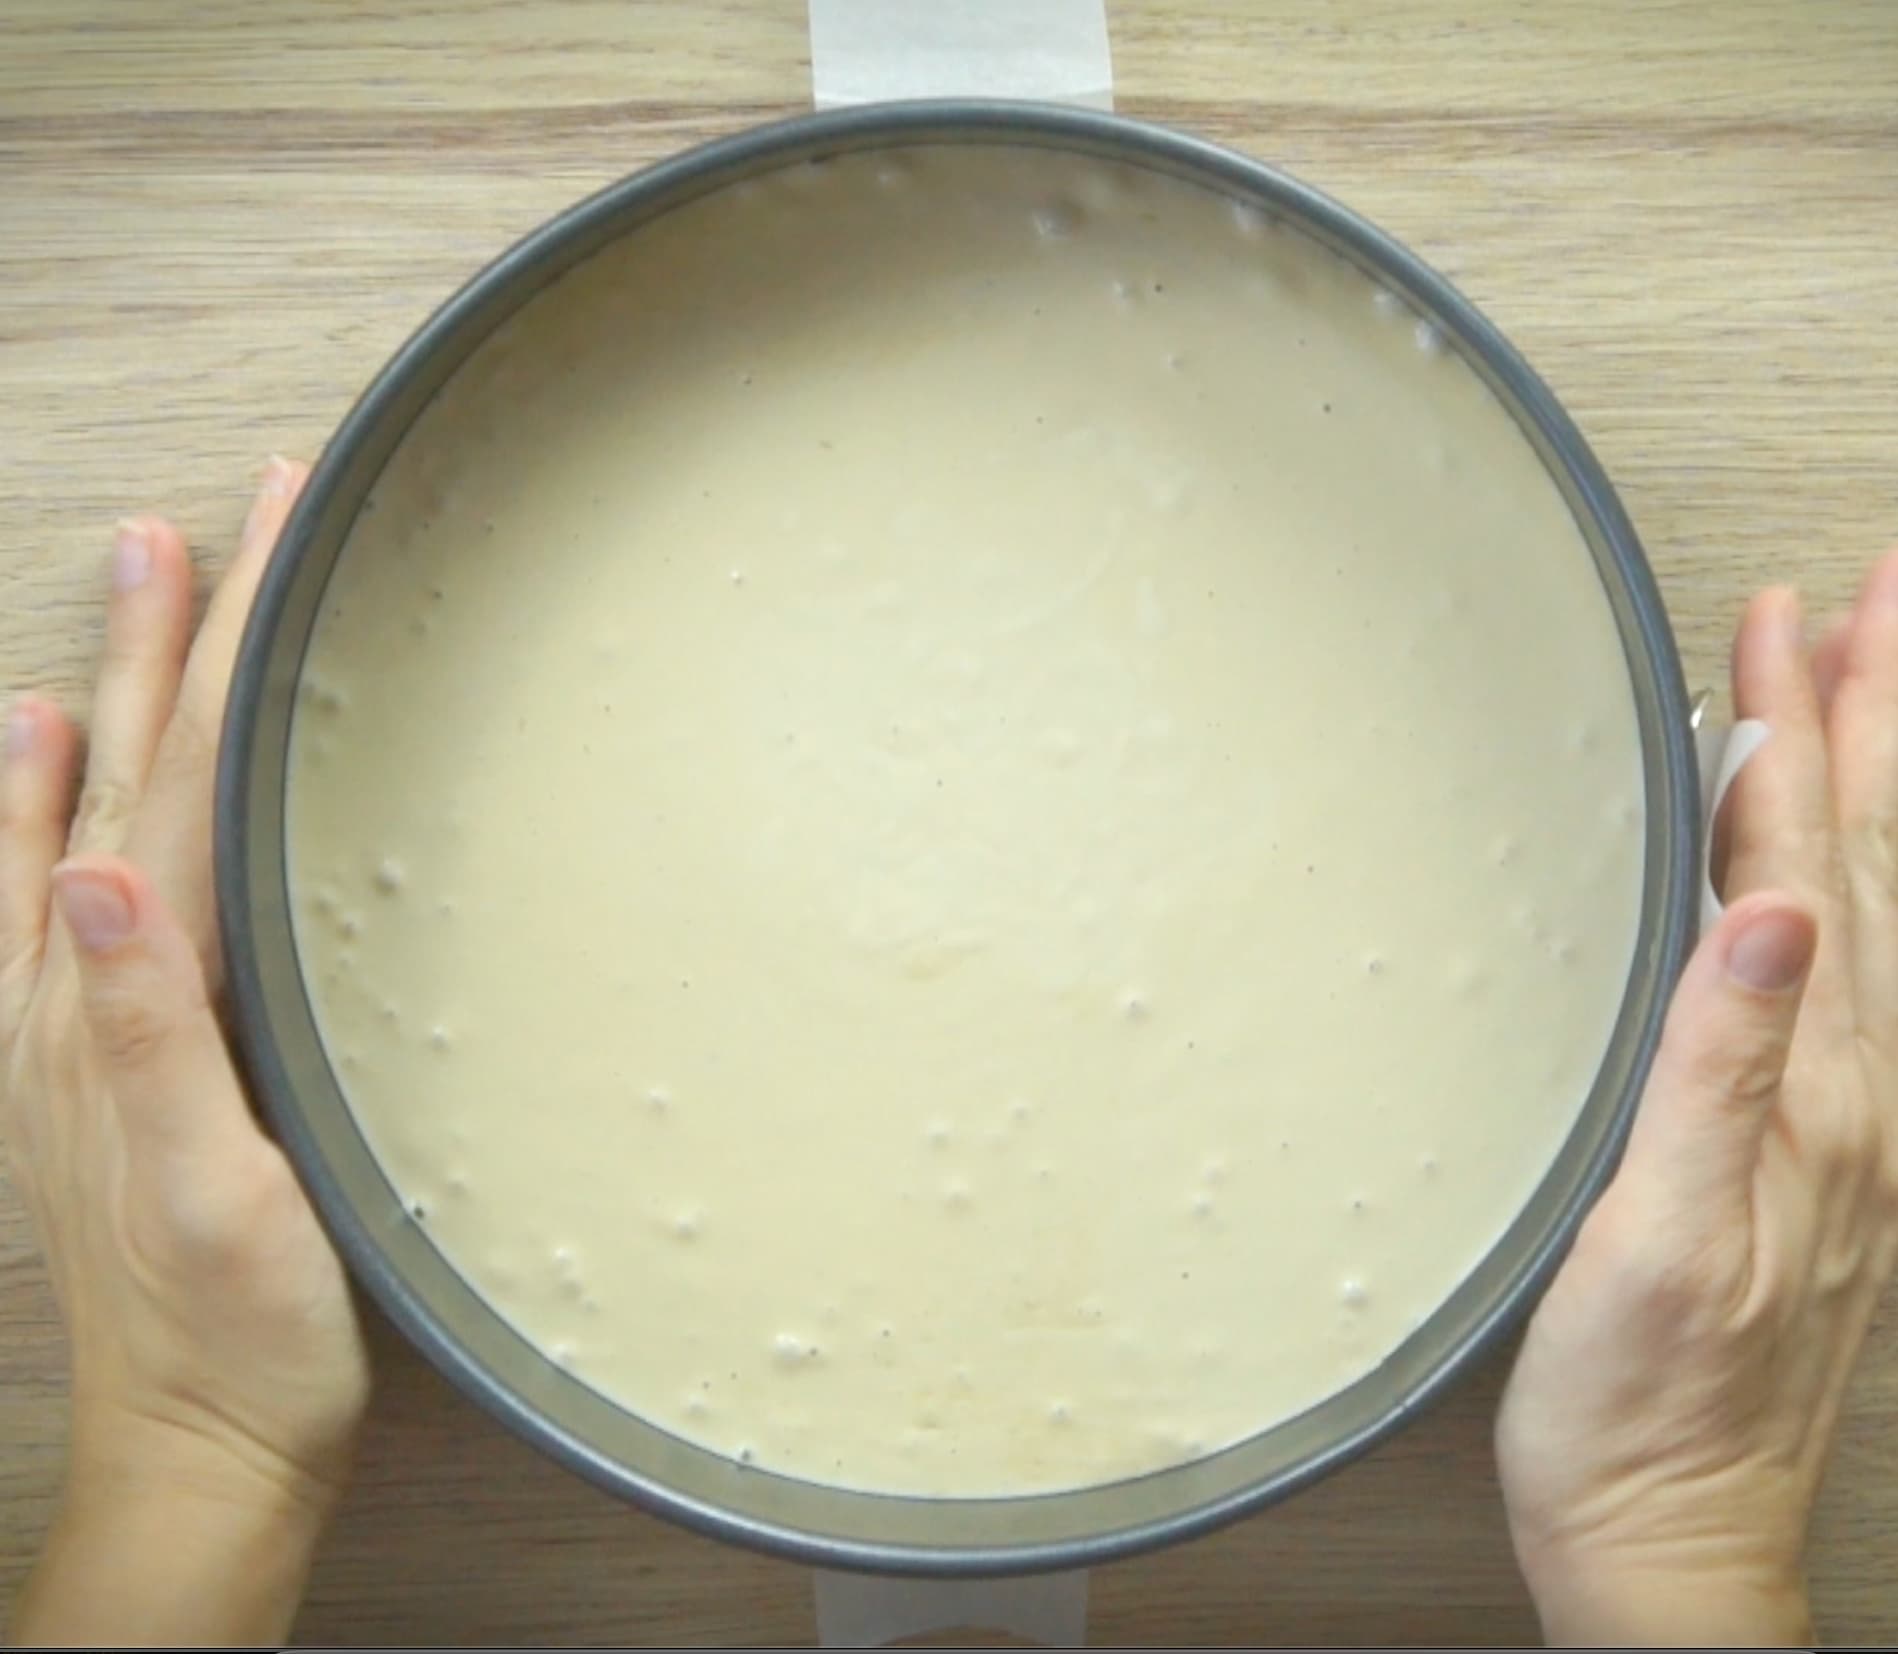 Two hands are holding acake pan with yellow batter.